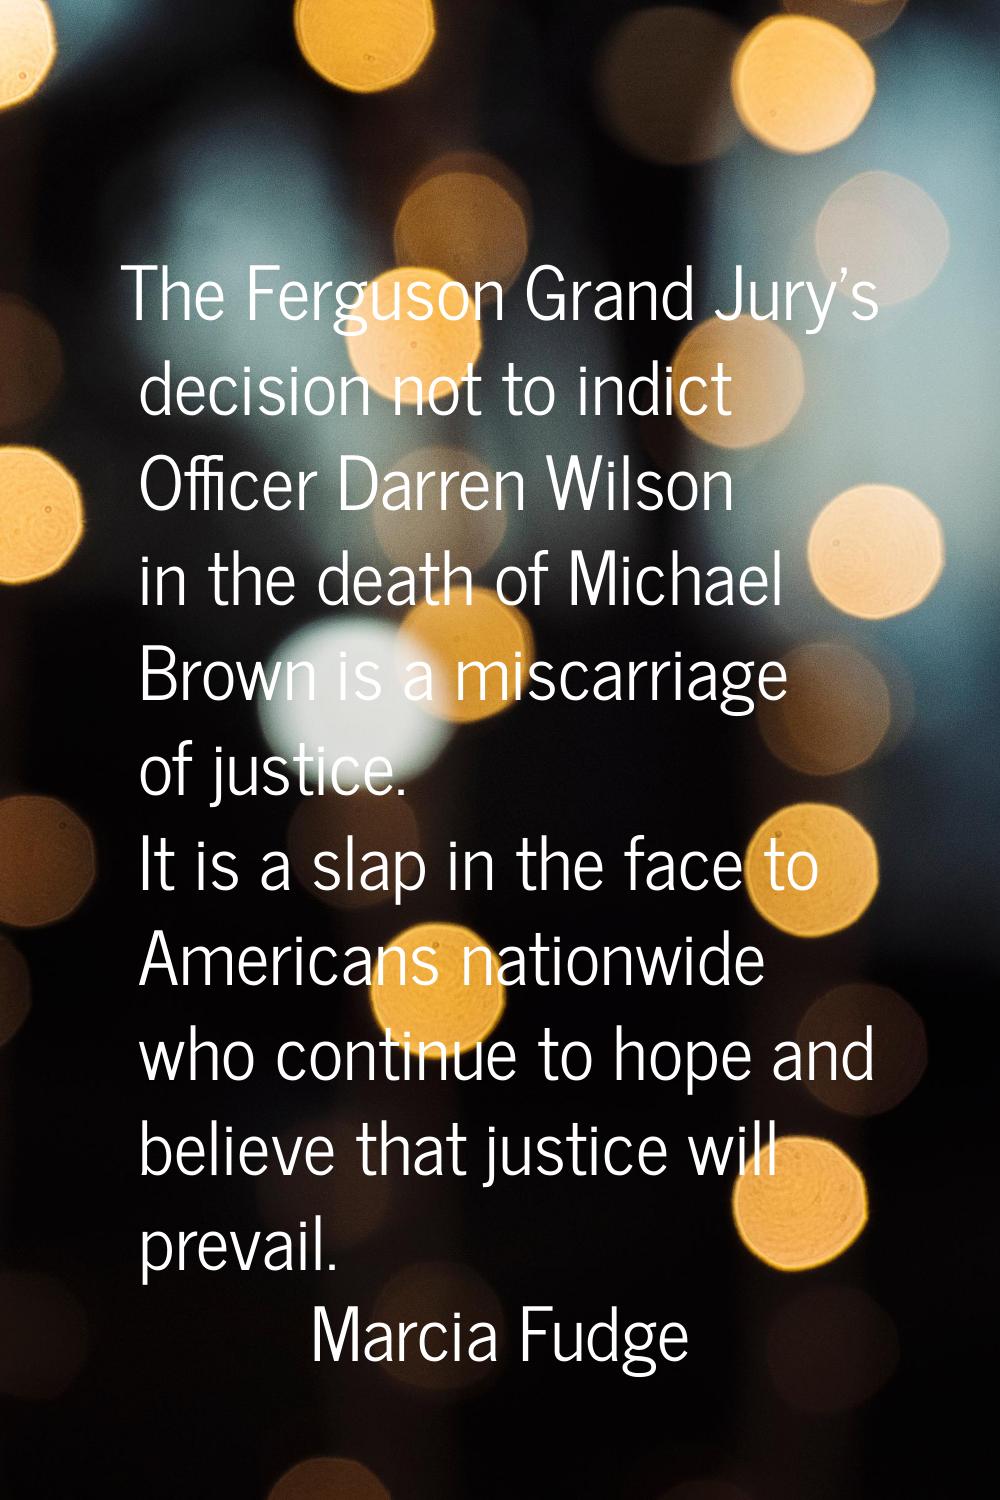 The Ferguson Grand Jury's decision not to indict Officer Darren Wilson in the death of Michael Brow